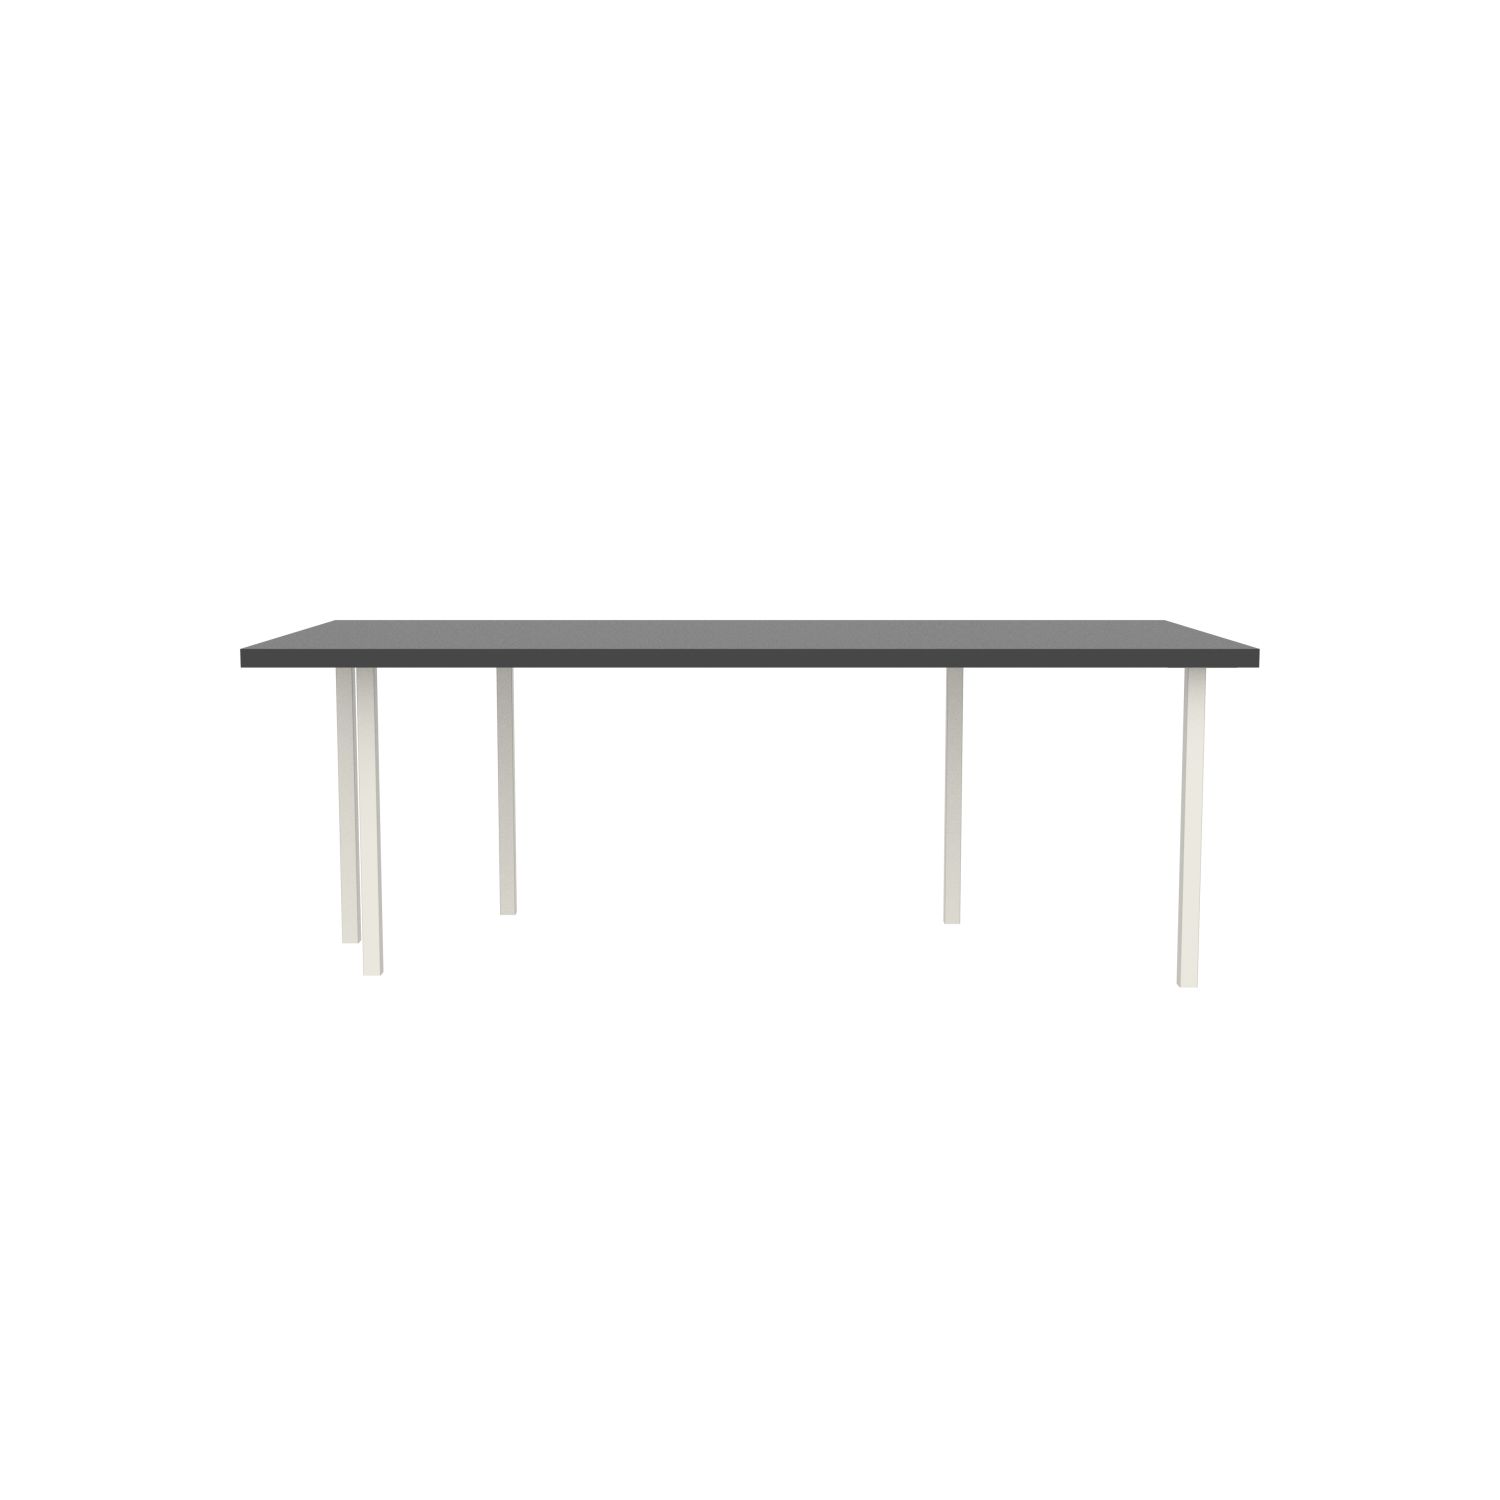 lensvelt bbrand table five fixed heigt 103x218 hpl black 50 mm price level 1 white ral9010